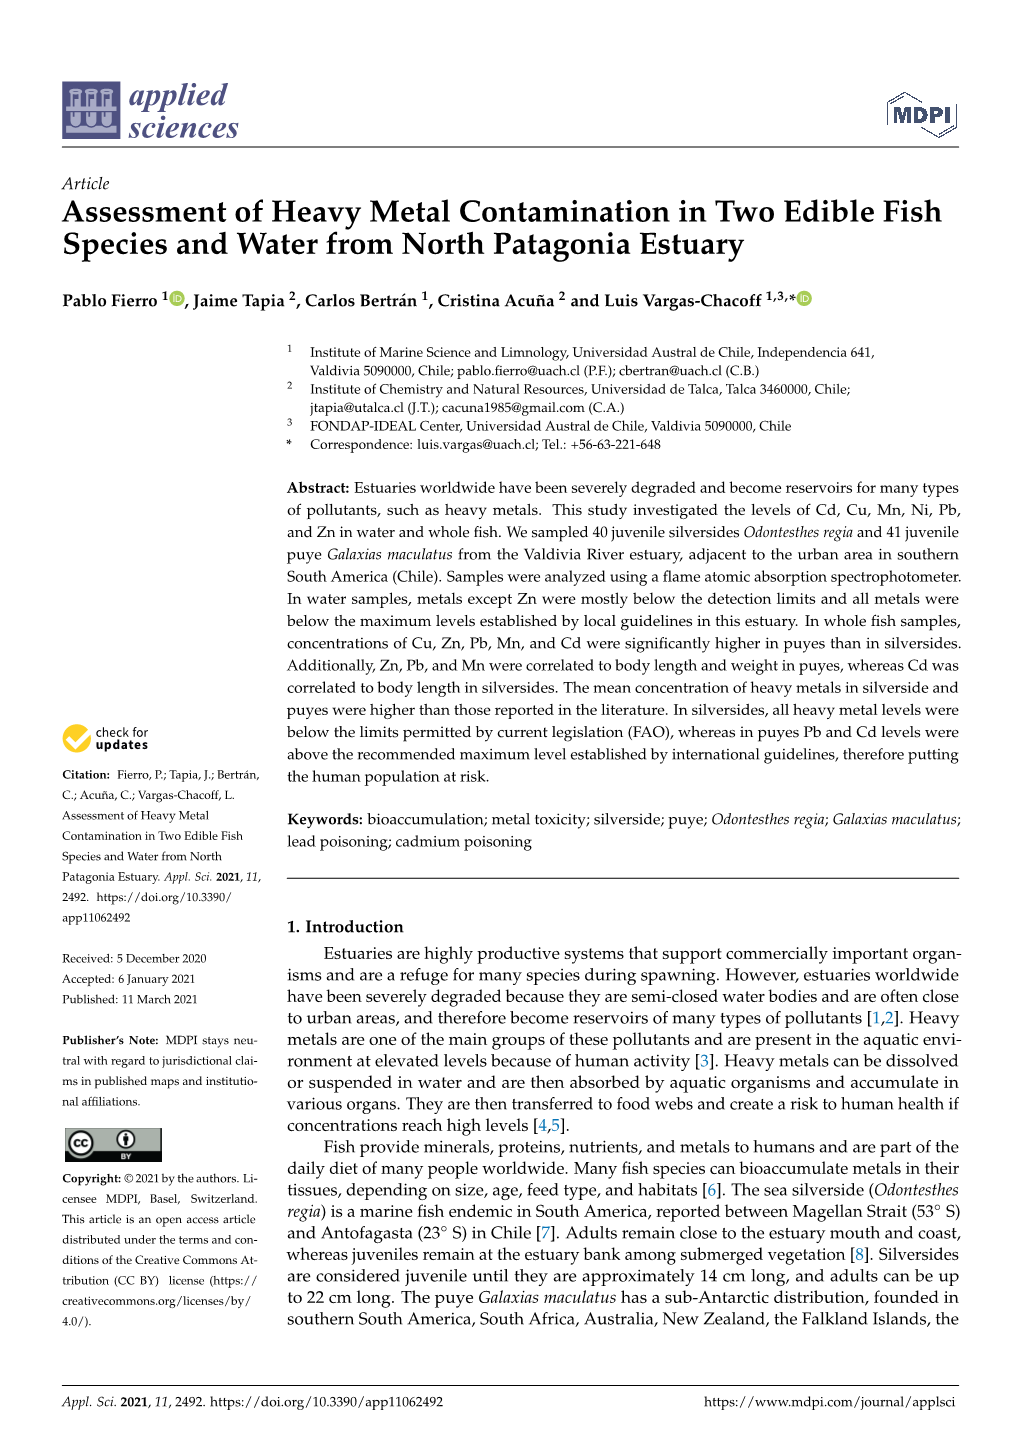 Assessment of Heavy Metal Contamination in Two Edible Fish Species and Water from North Patagonia Estuary